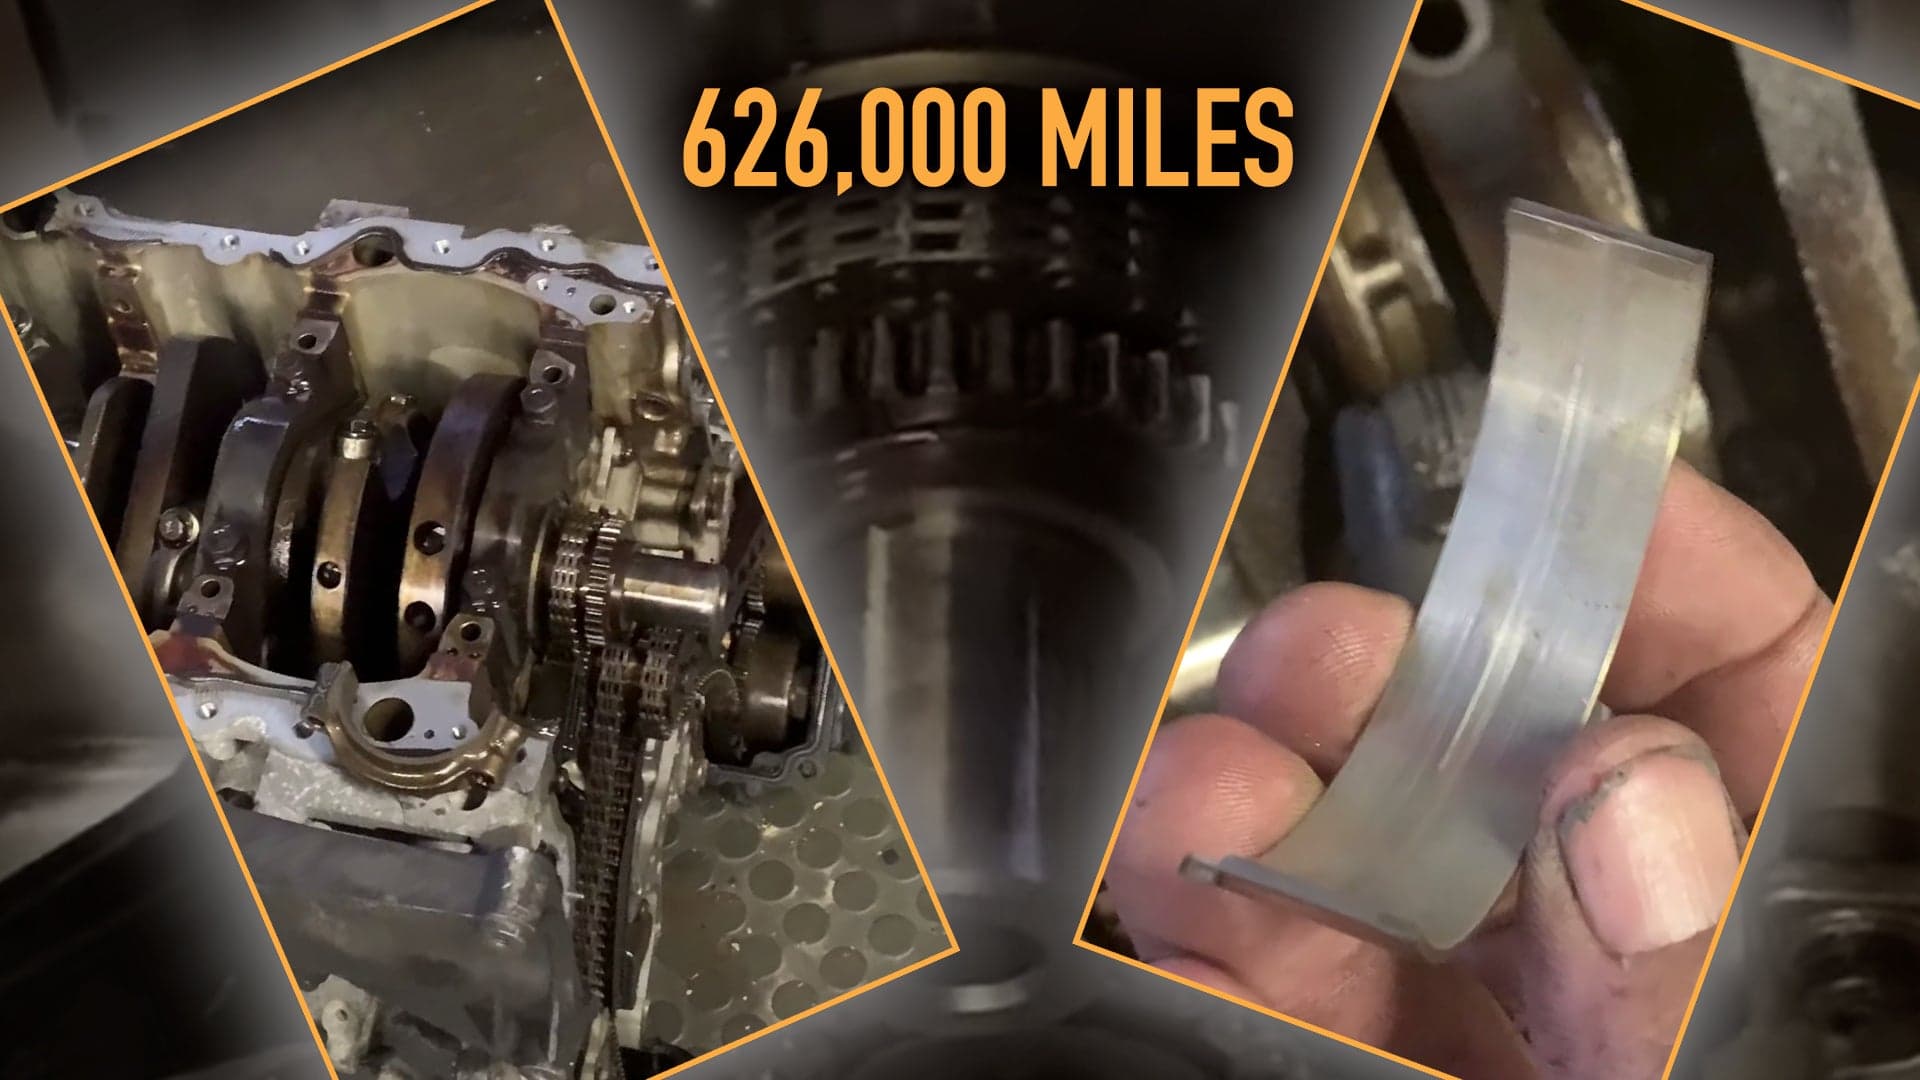 Check Out How Surprisingly Durable This Chrysler Pentastar V6 Is After 626,000 Miles